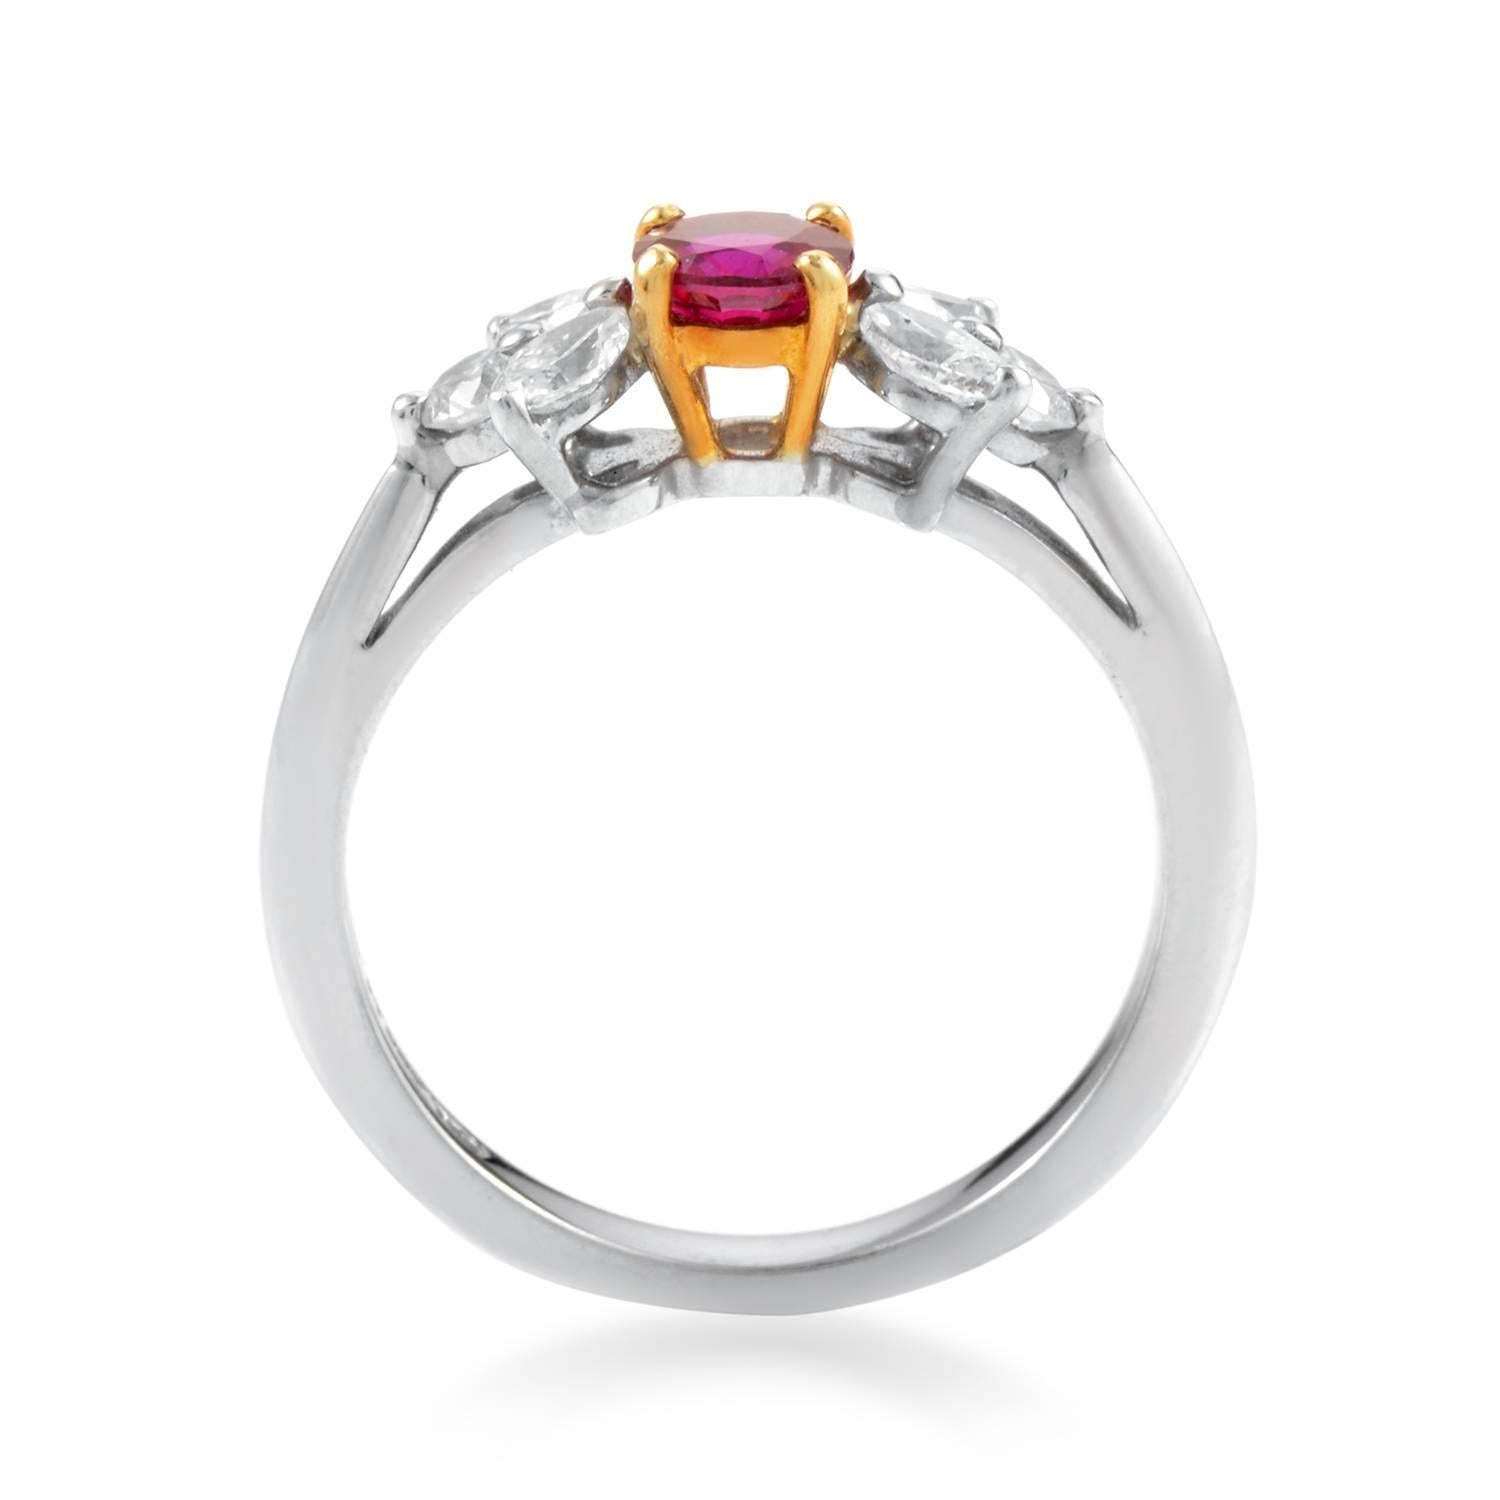 Tastefully complemented by the radiant 18K yellow gold to provide excellent balance in a design dominated by splendid platinum and bright diamonds weighing in total 0.20ct, the passionate ruby weighs 0.50ct and lends its fabulous nuance to this